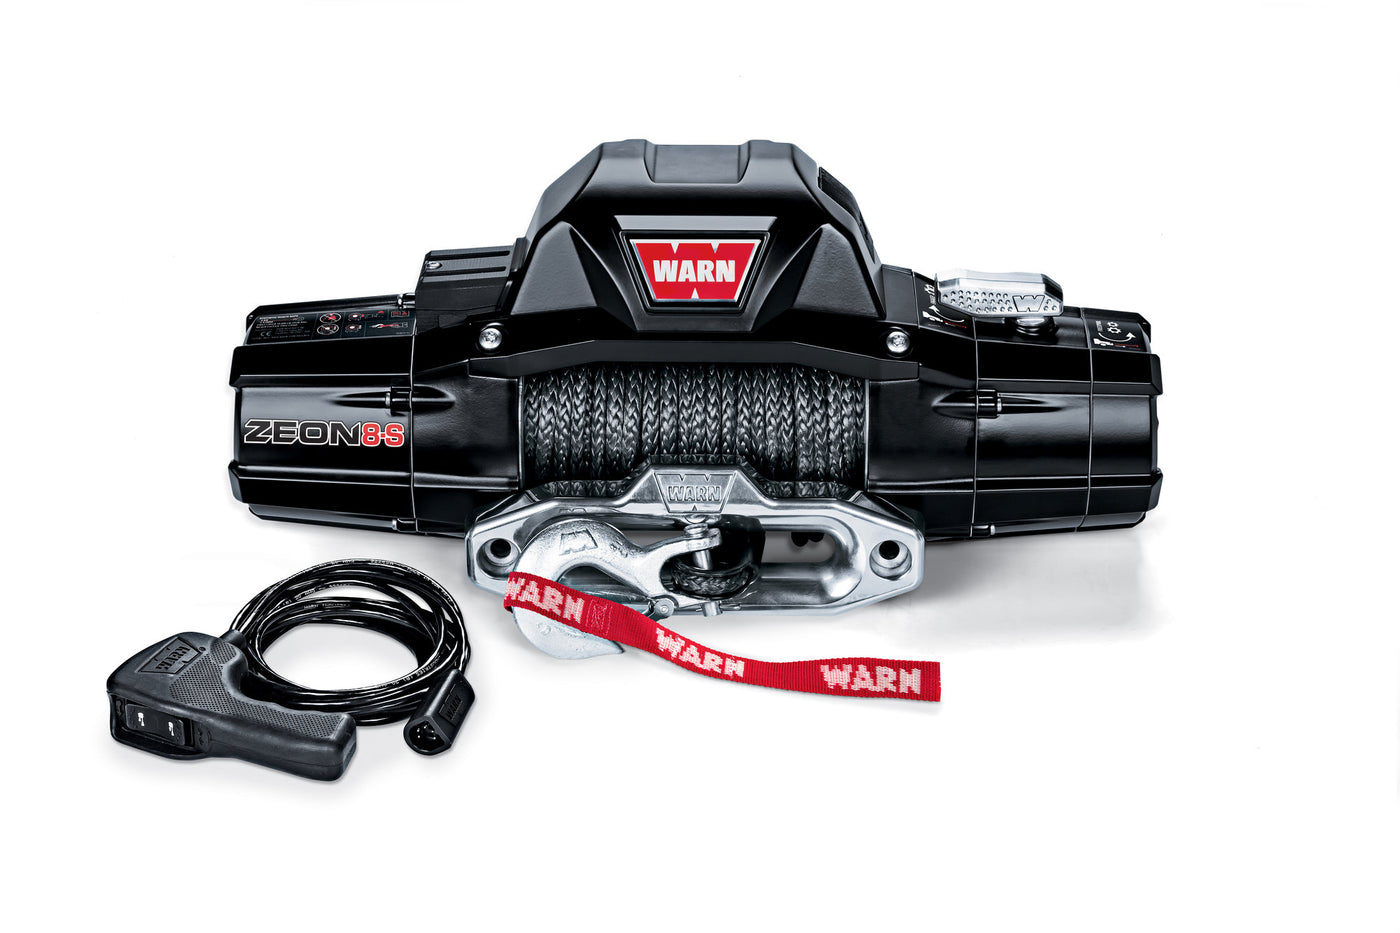 WARN ZEON 8-S Winch with 100' Spydura Synthetic Rope and Hawse Fairlead